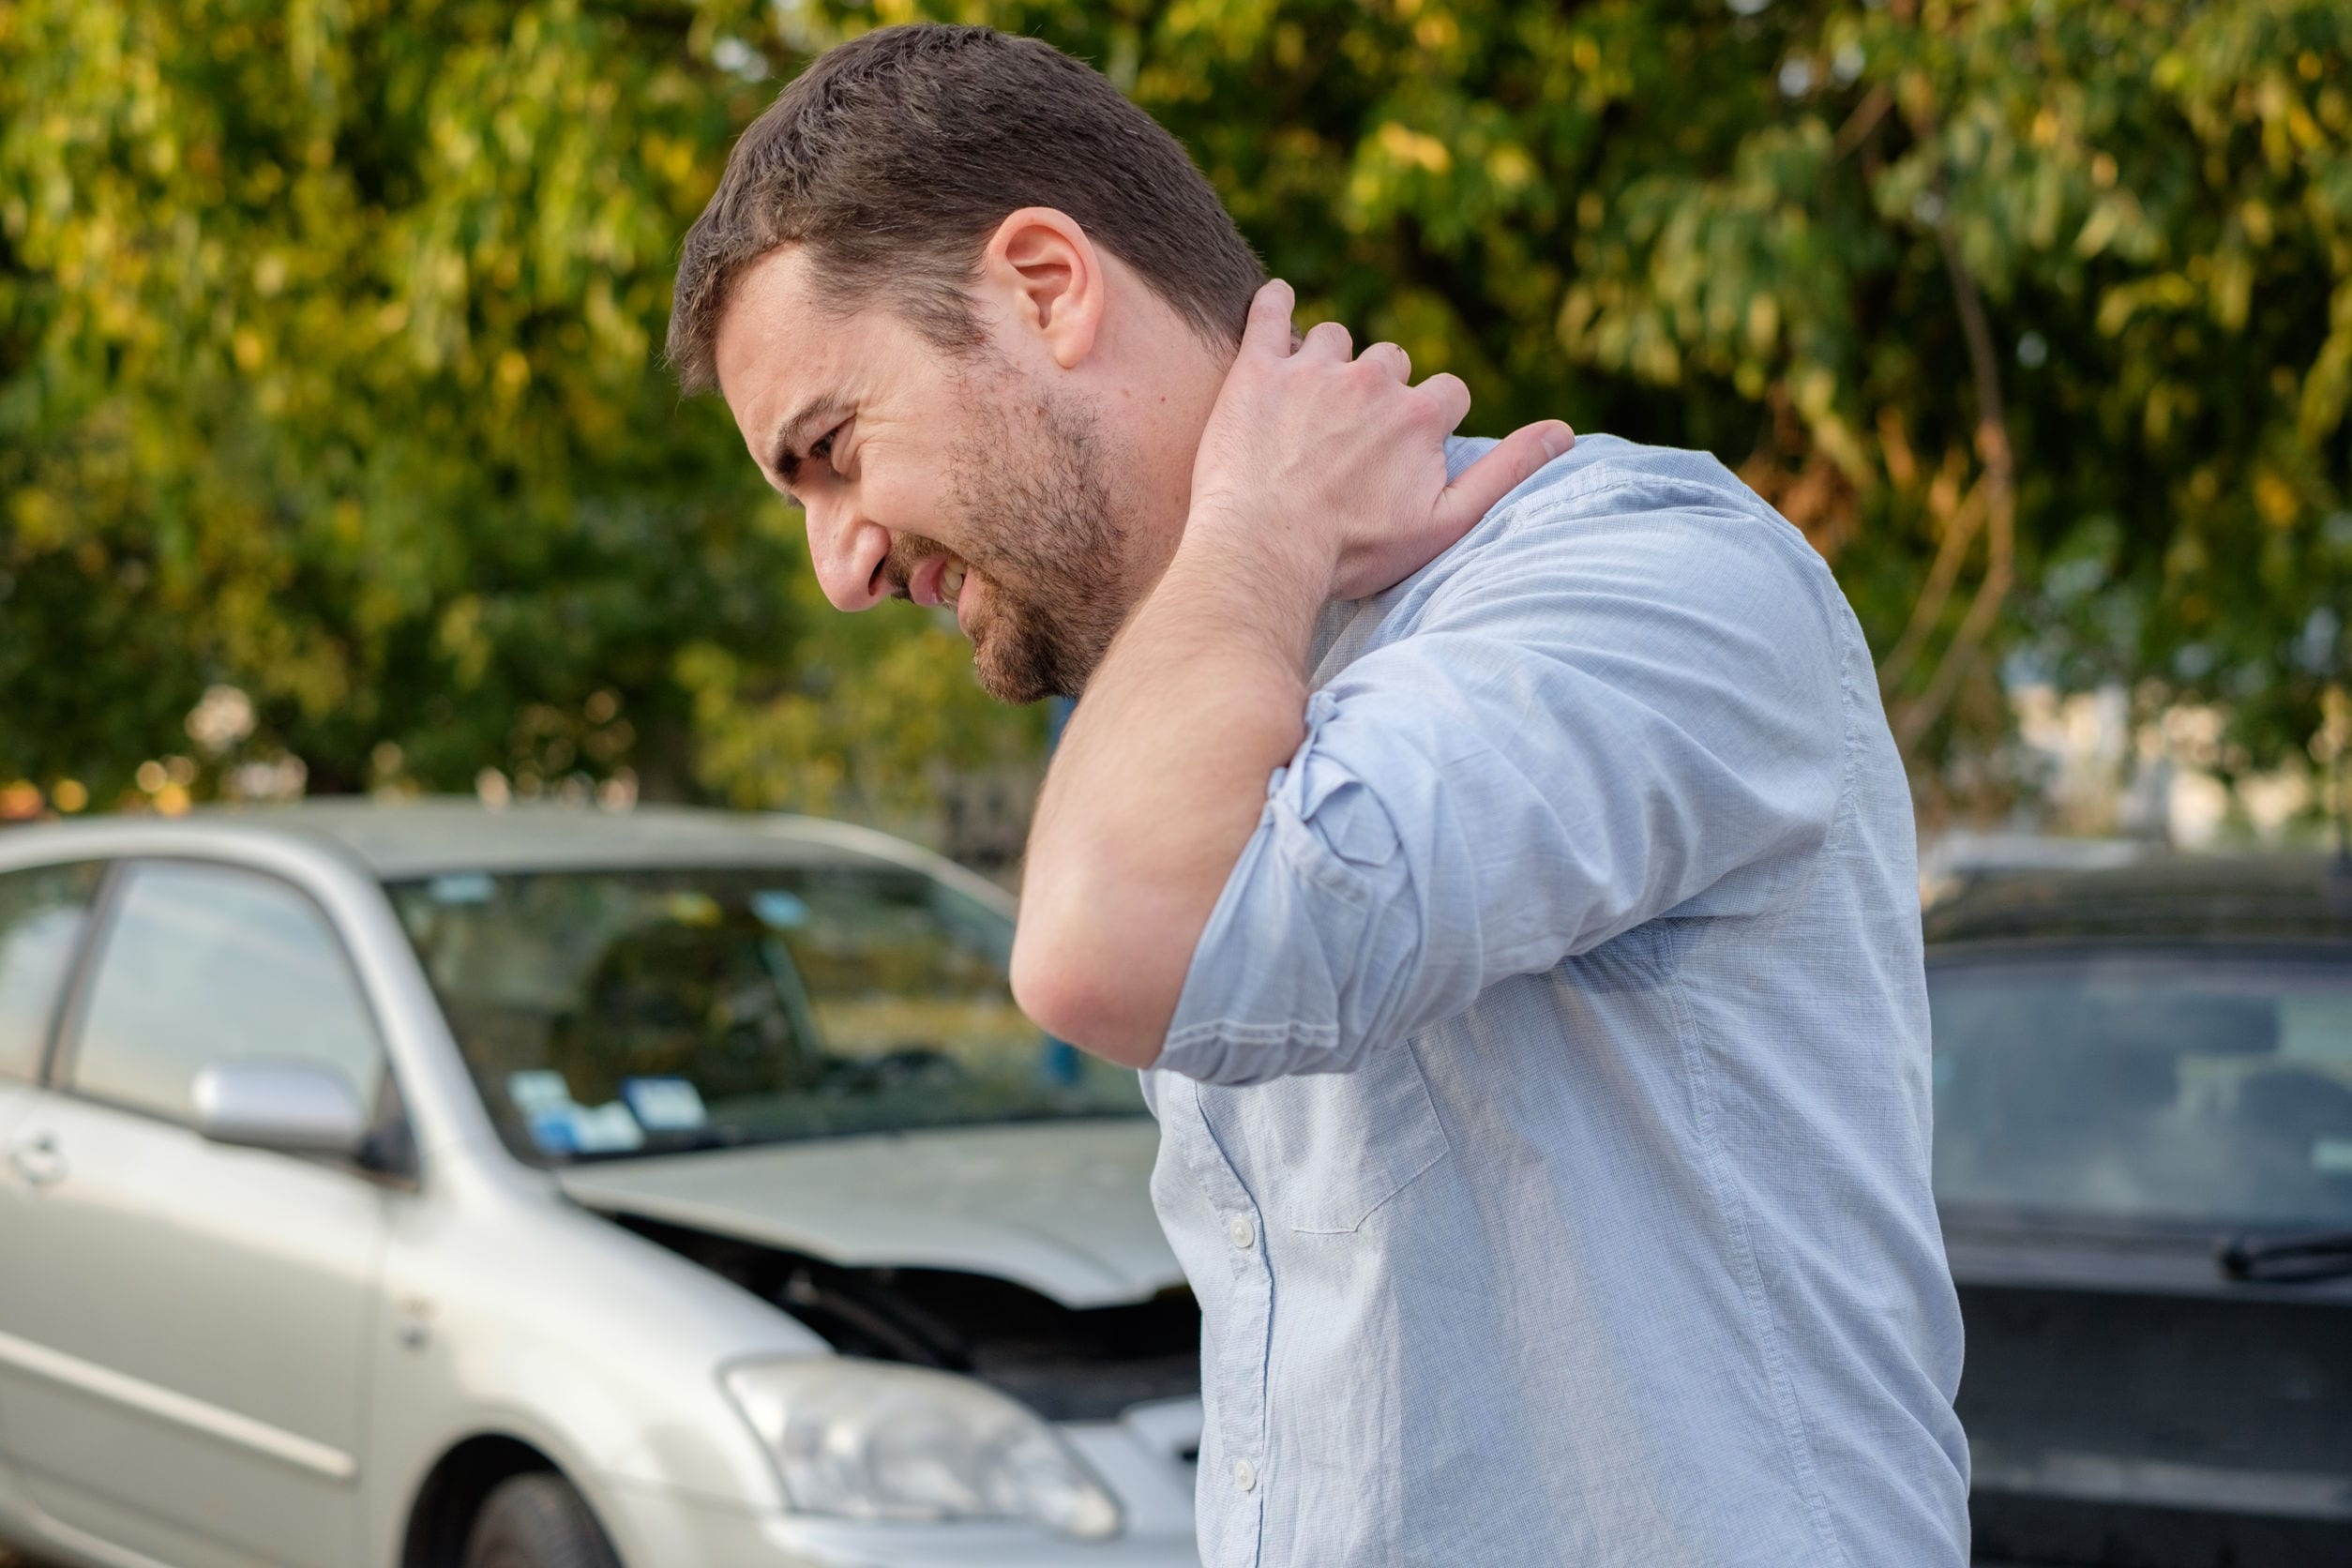 You Just Had a Car Crash – When Should You See the Chiropractor?